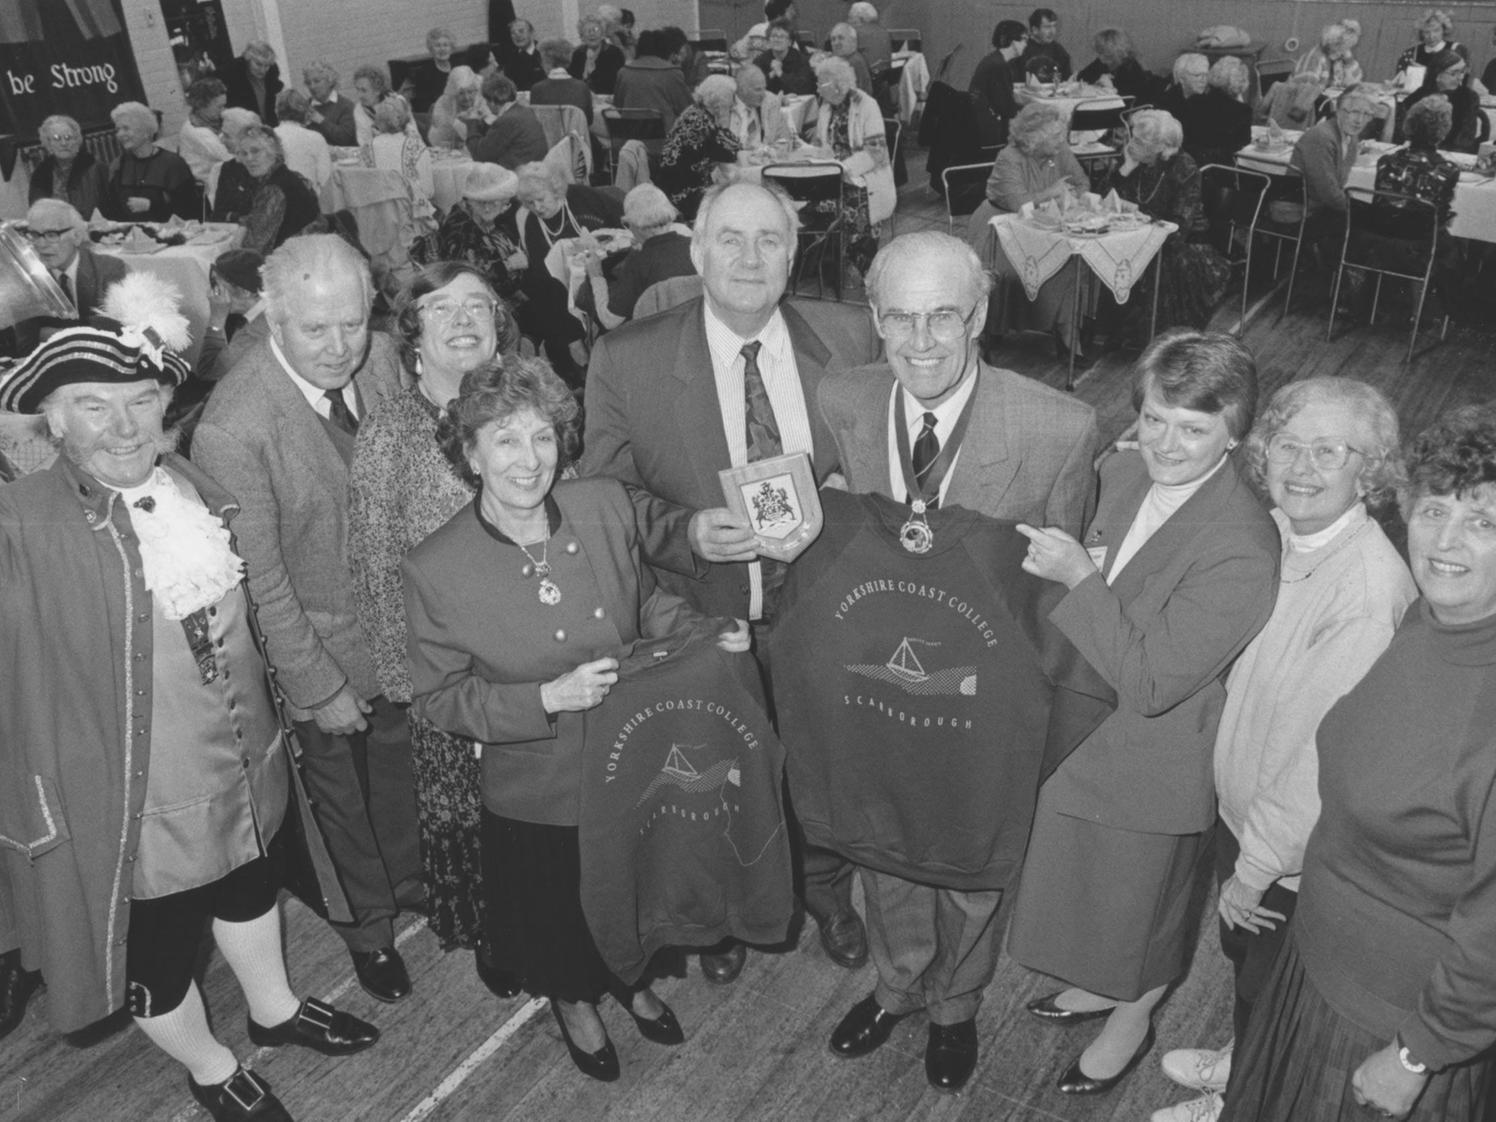 Special guests at the Yorkshire Coast College's Local History class Christmas lunch, December 1992, from left, town crier Alan Booth, Eric Lahteela, chairman of governors, Marie Belfitt, history lecturer and Evening News columnist, Stan Dey, college principal, mayor and mayoress Jack and Pauline Warwick, fay Crapper, adult education coordinator, Celia Lahteela, and Pat Dey.